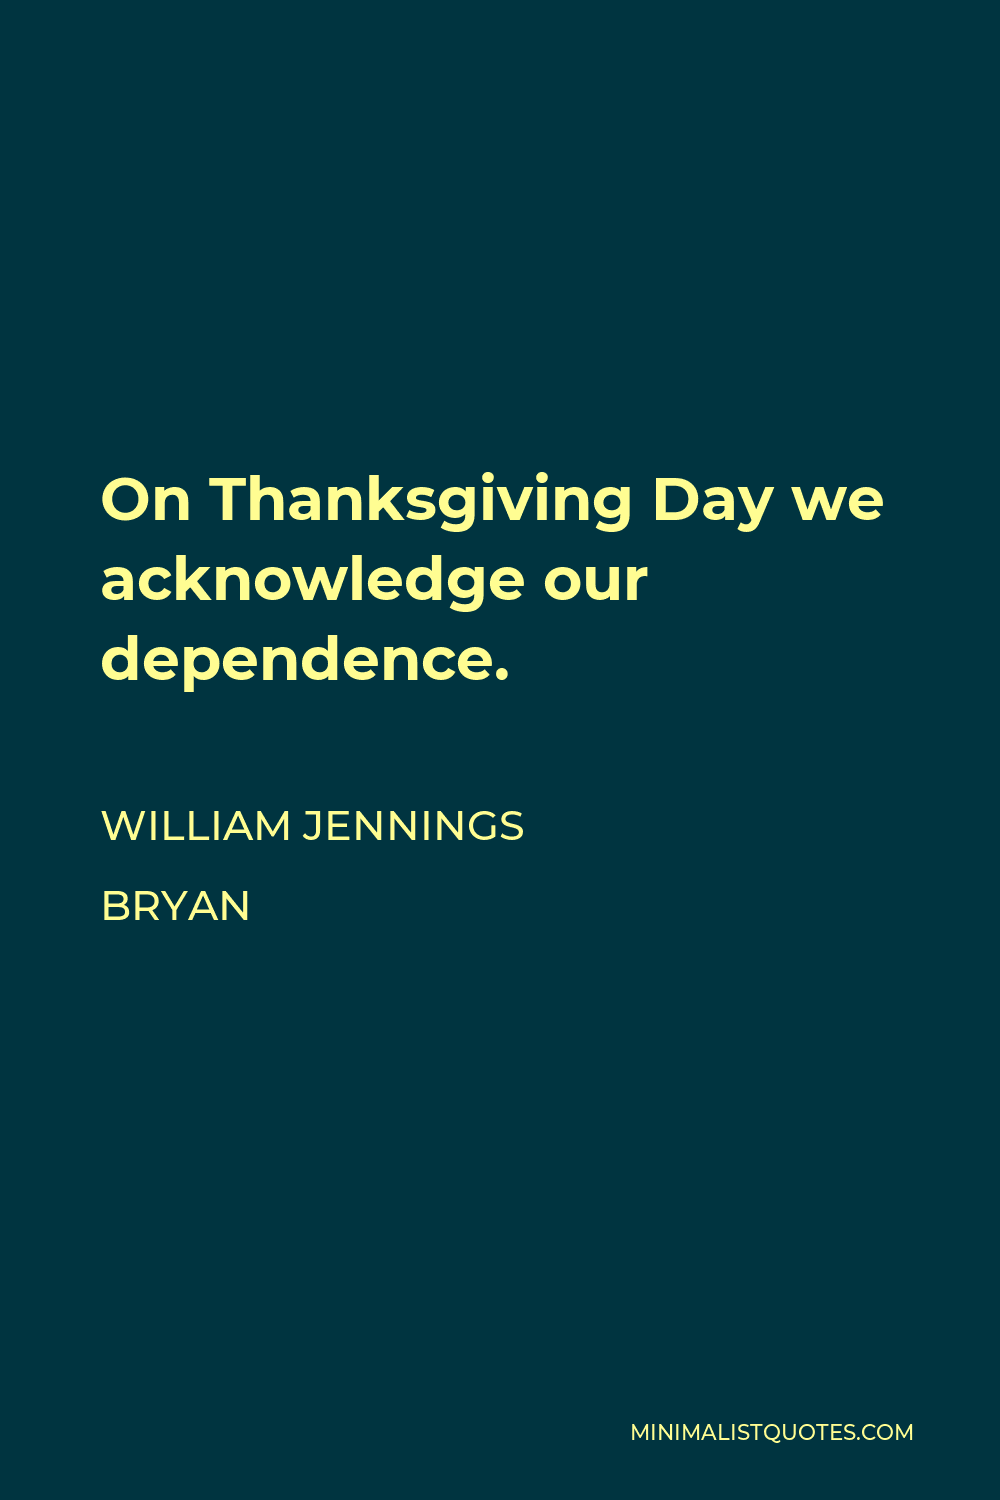 William Jennings Bryan Quote - On Thanksgiving Day we acknowledge our dependence.